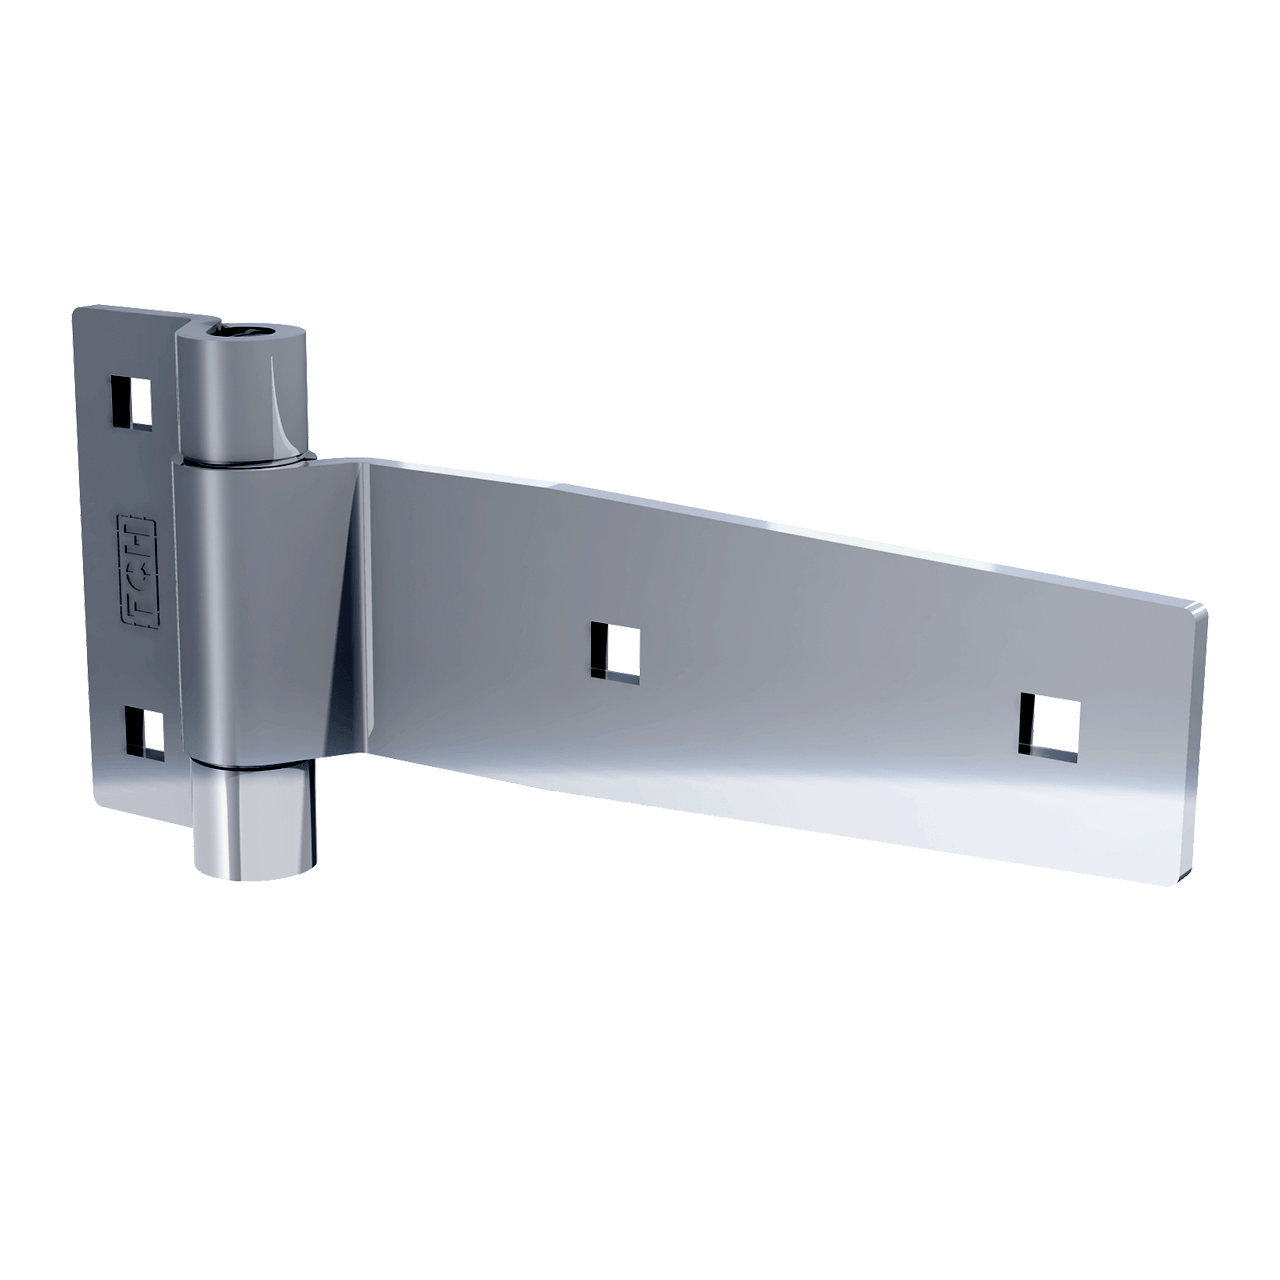 TCH - 8 Polished Stainless Steel Strap Hinge